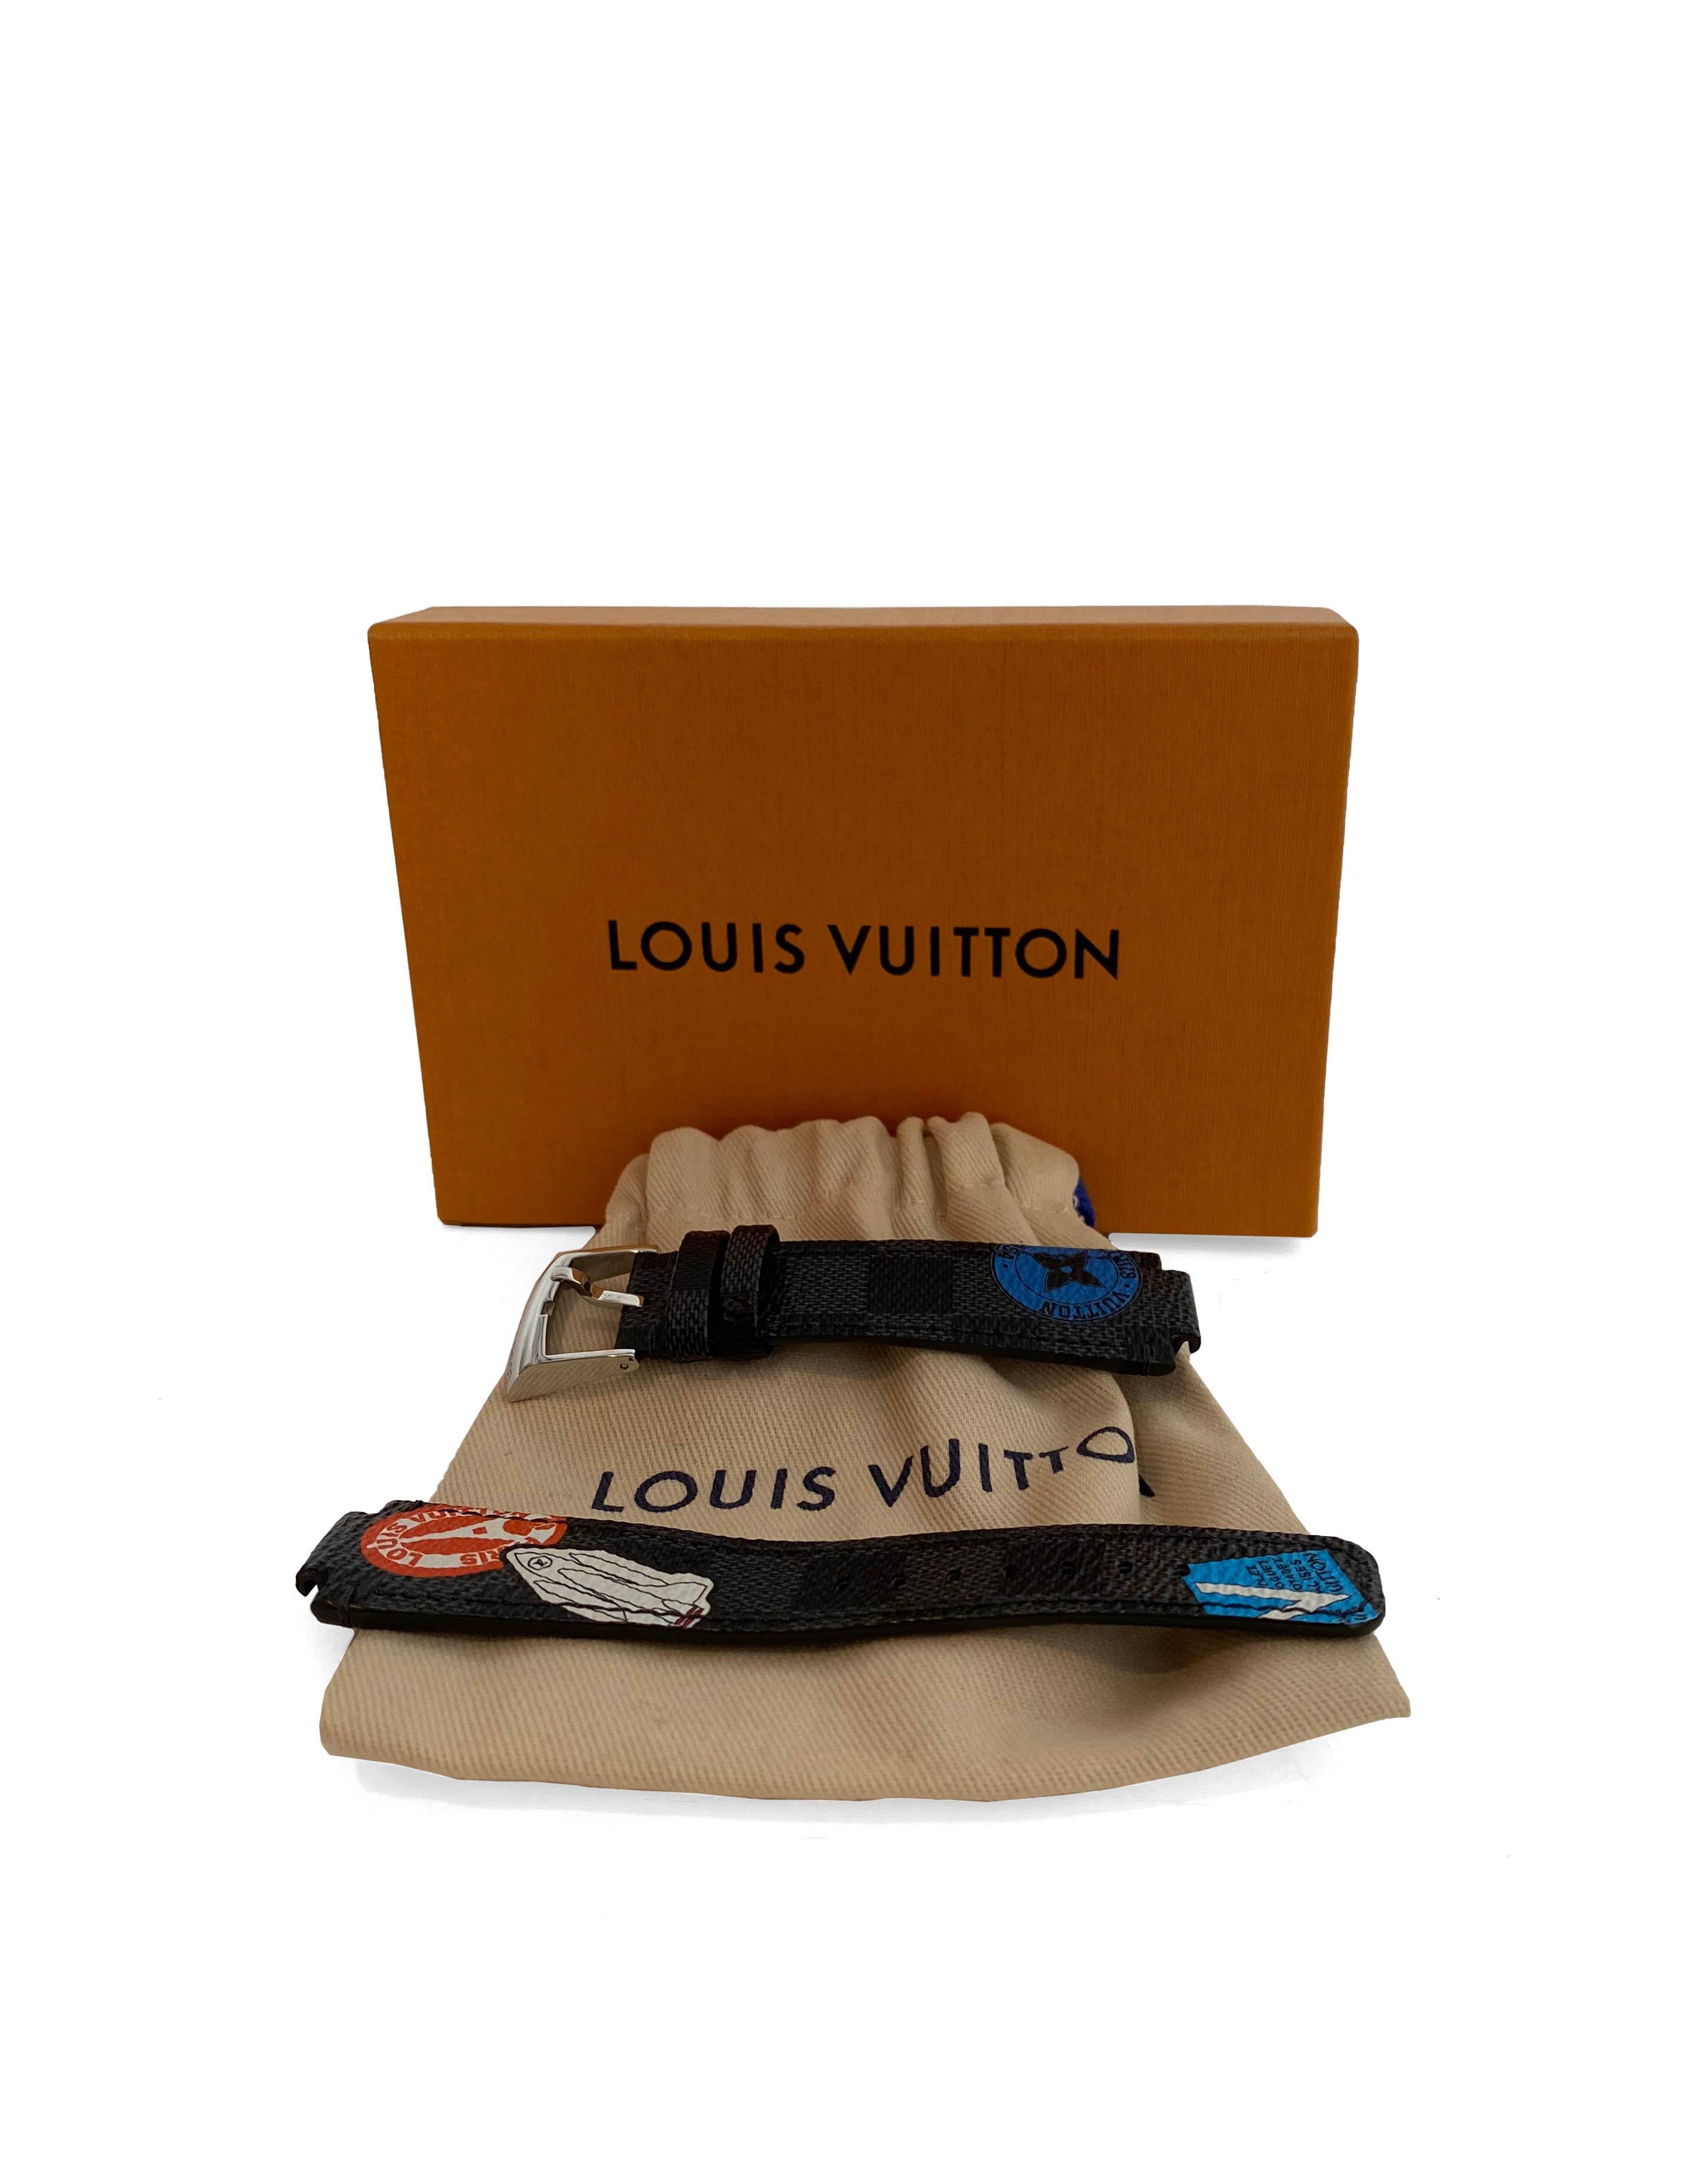 Louis Vuitton Damier Graphite World Tour Watch Strap.  Watch strap for LV Tambour 39 watch.

Made In: France
Color: Black, red, blue, white
Materials: Coated canvas and leather
Model Name: Compatible with Tambour 39 watch
Retail Price: $405 plus